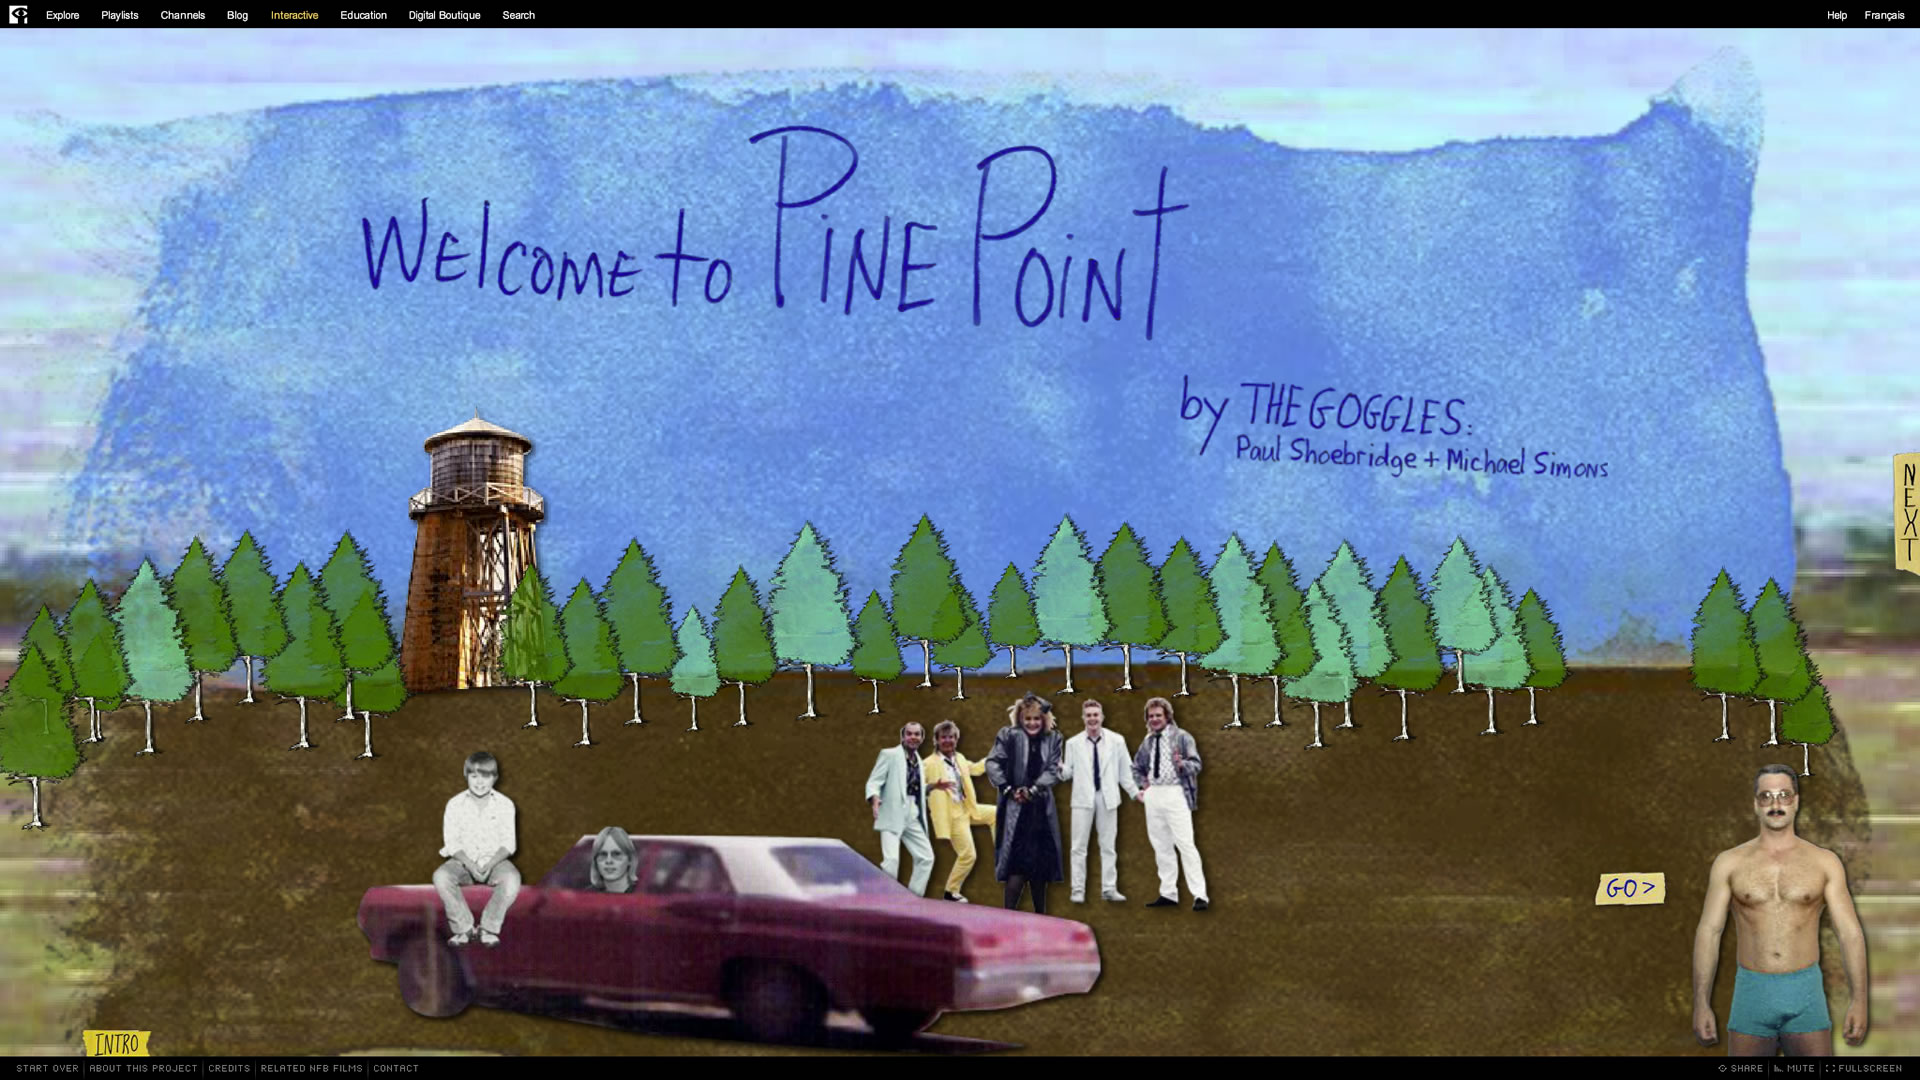 Welcome to Pine Point - Start Screen